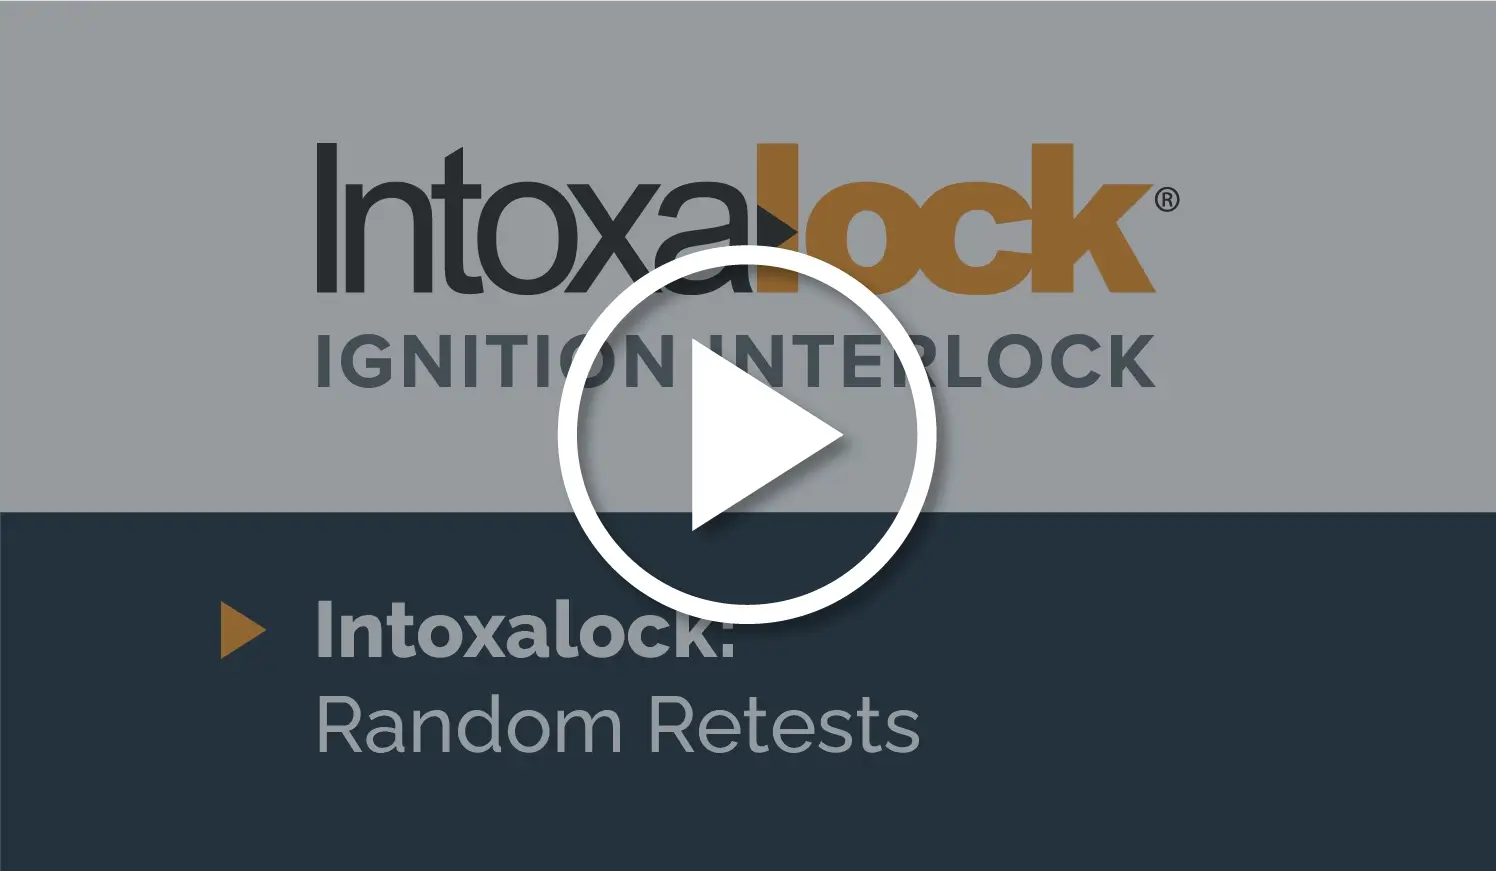 Watch Video: What is an Ignition Interlock Device?